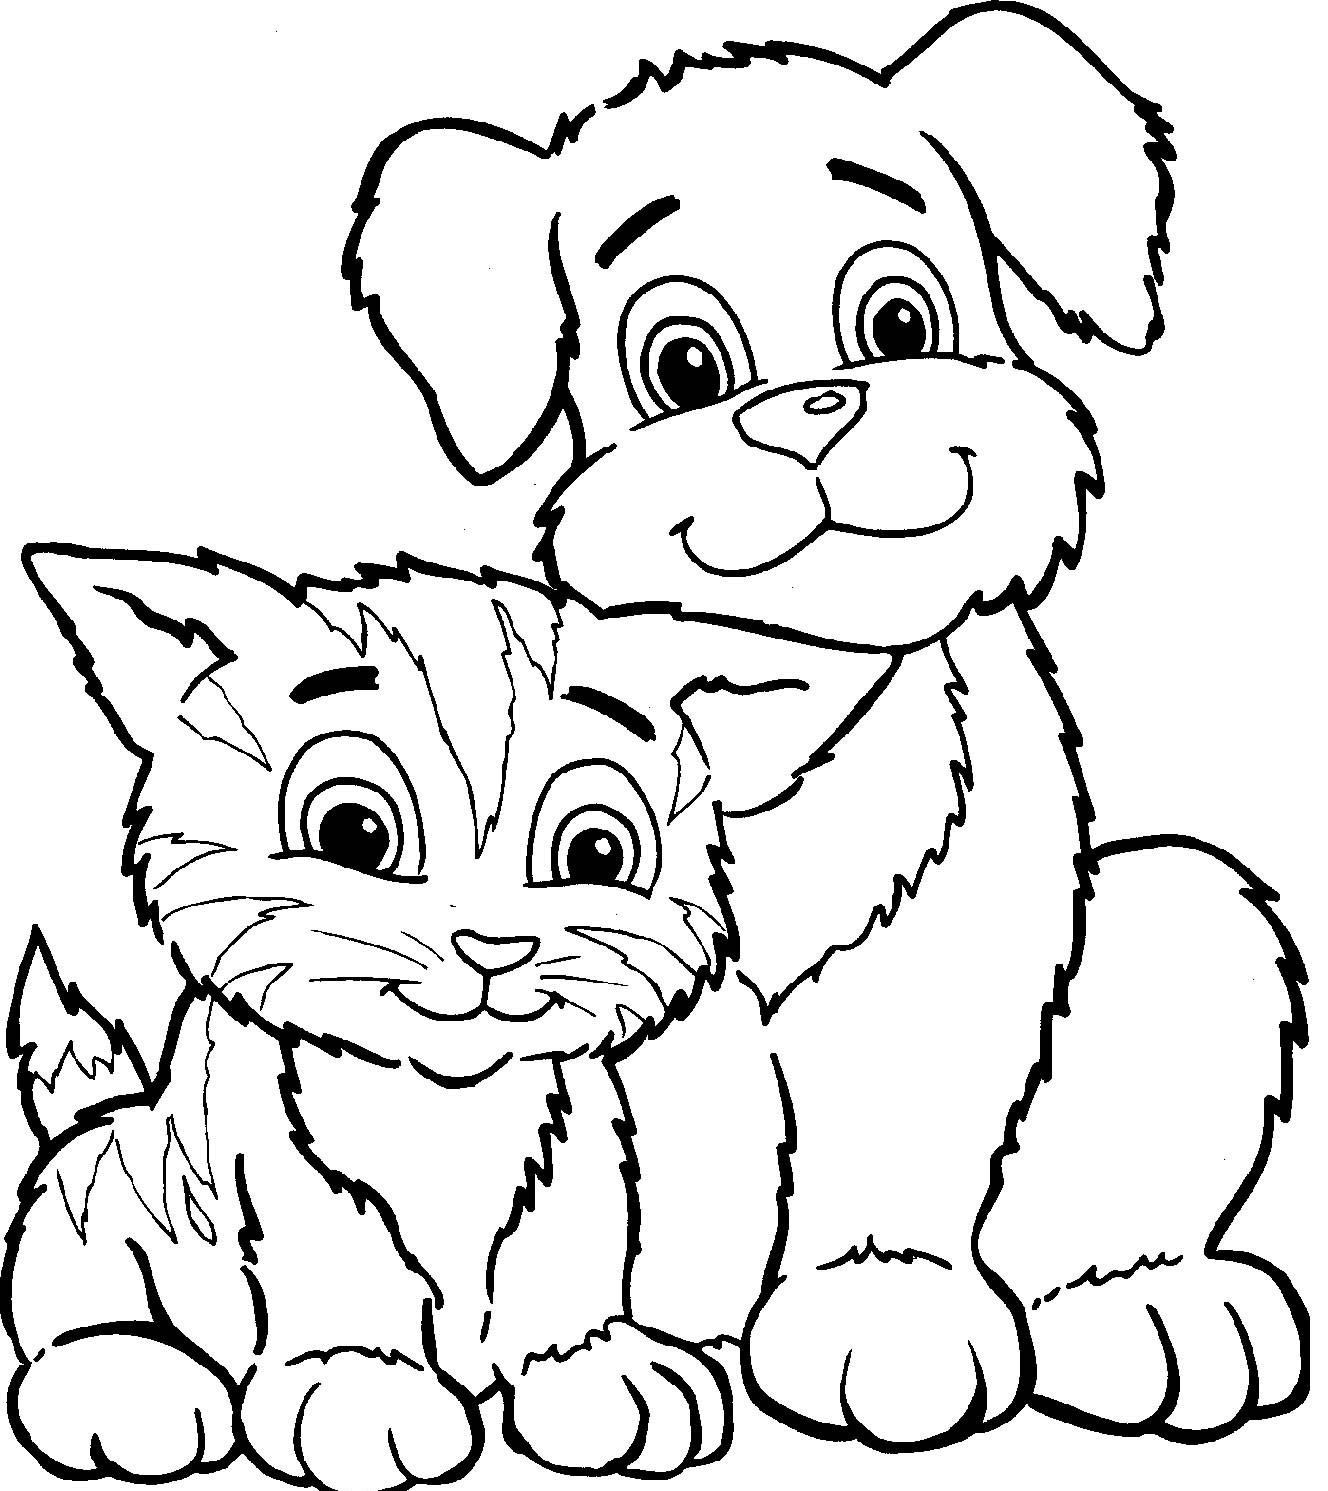 Coolest Dog And Cat Coloring Pages Printable 33 For Your with Dog And Cat Coloring Pages